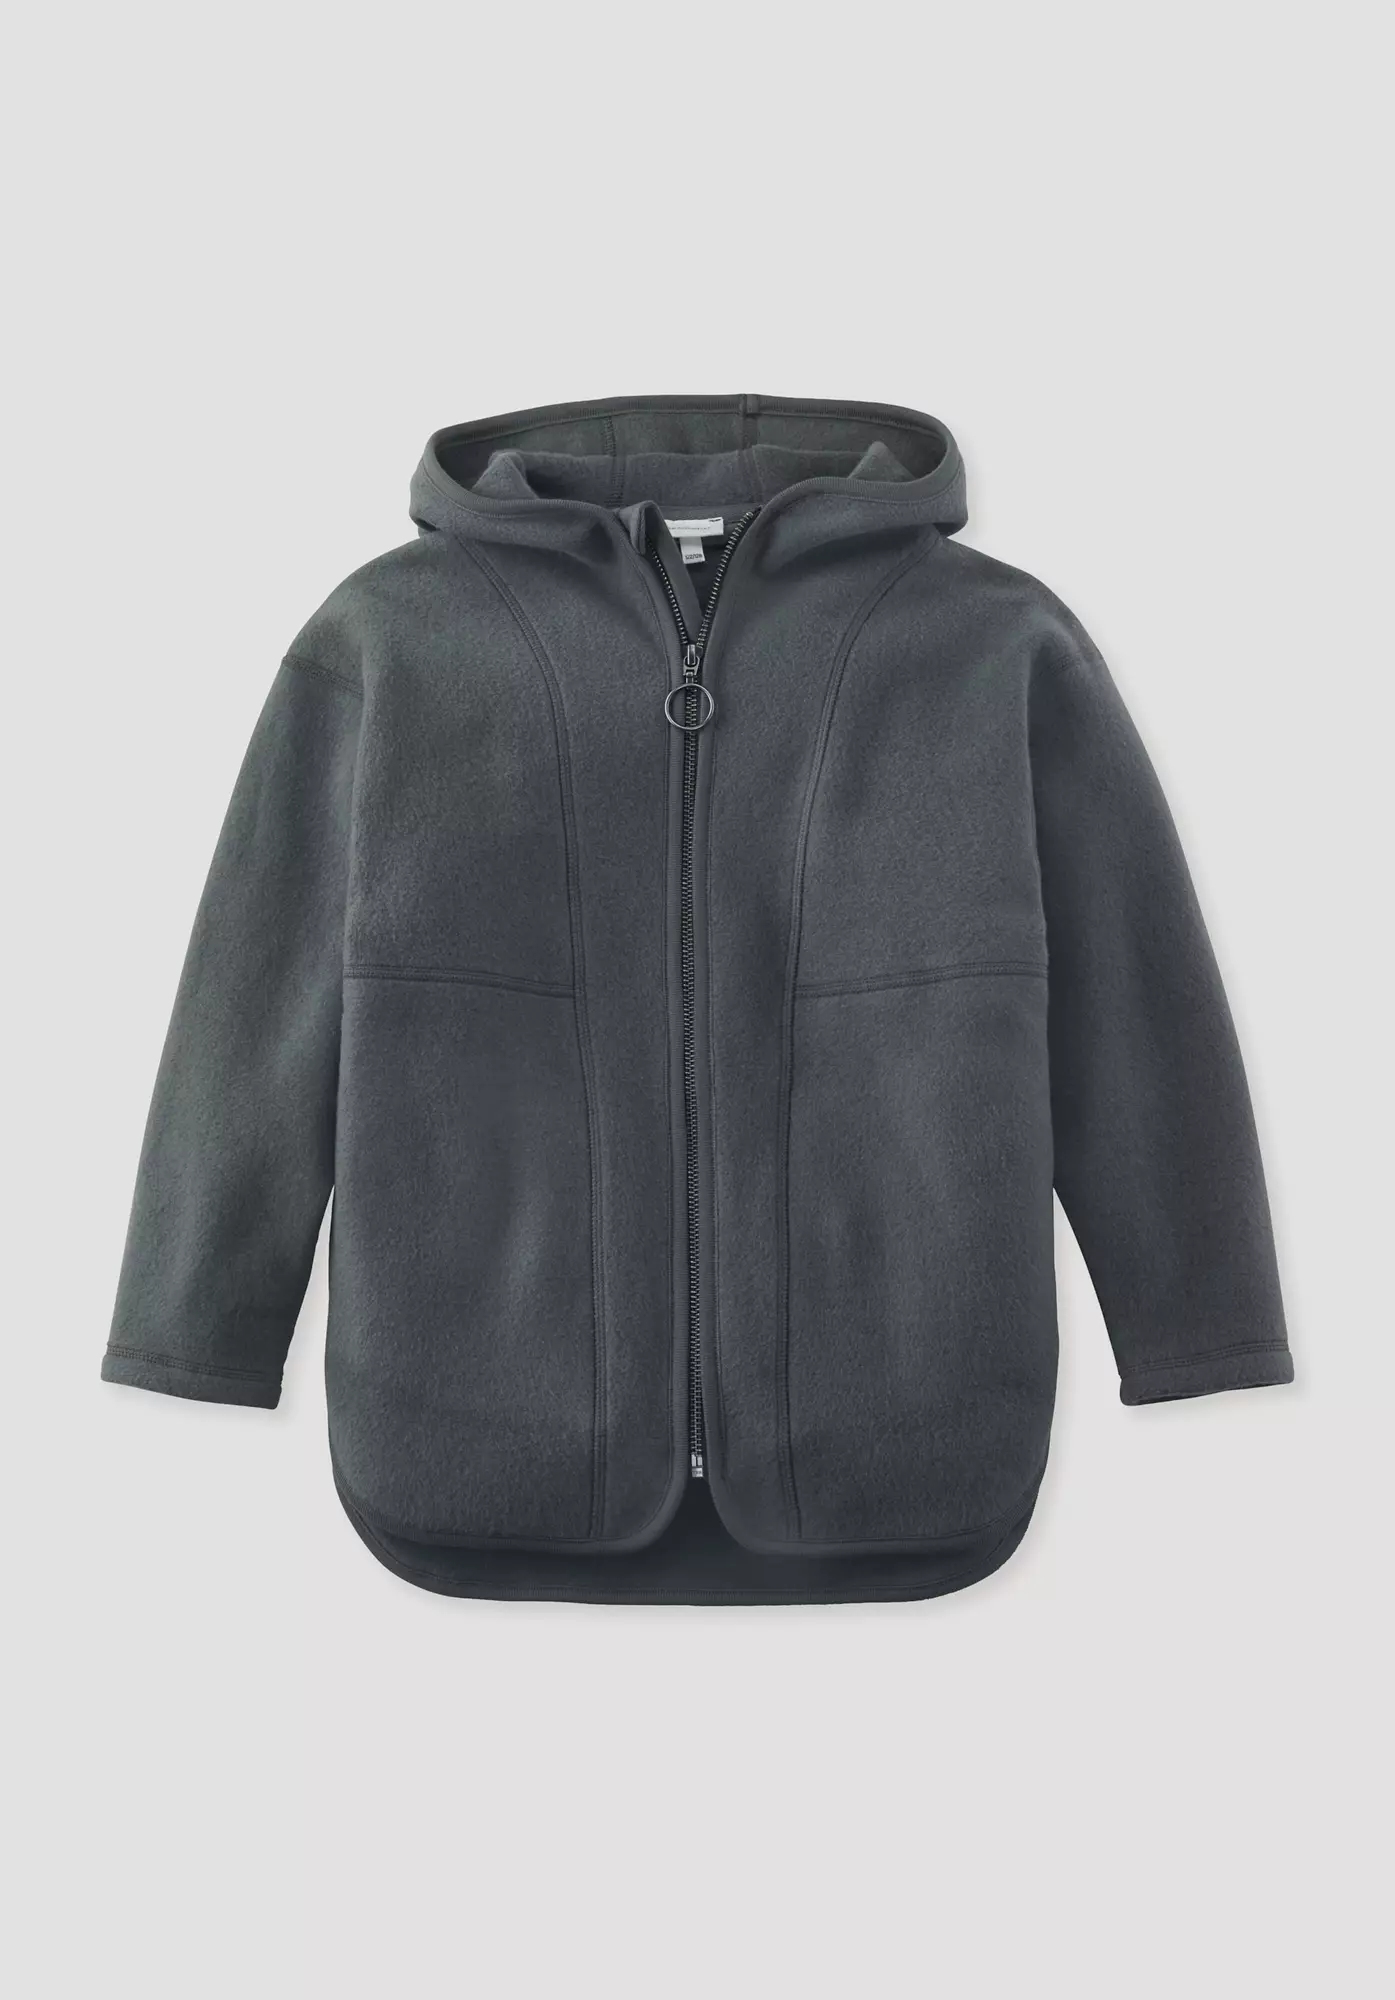 Soft fleece jacket made from pure organic cotton - 0